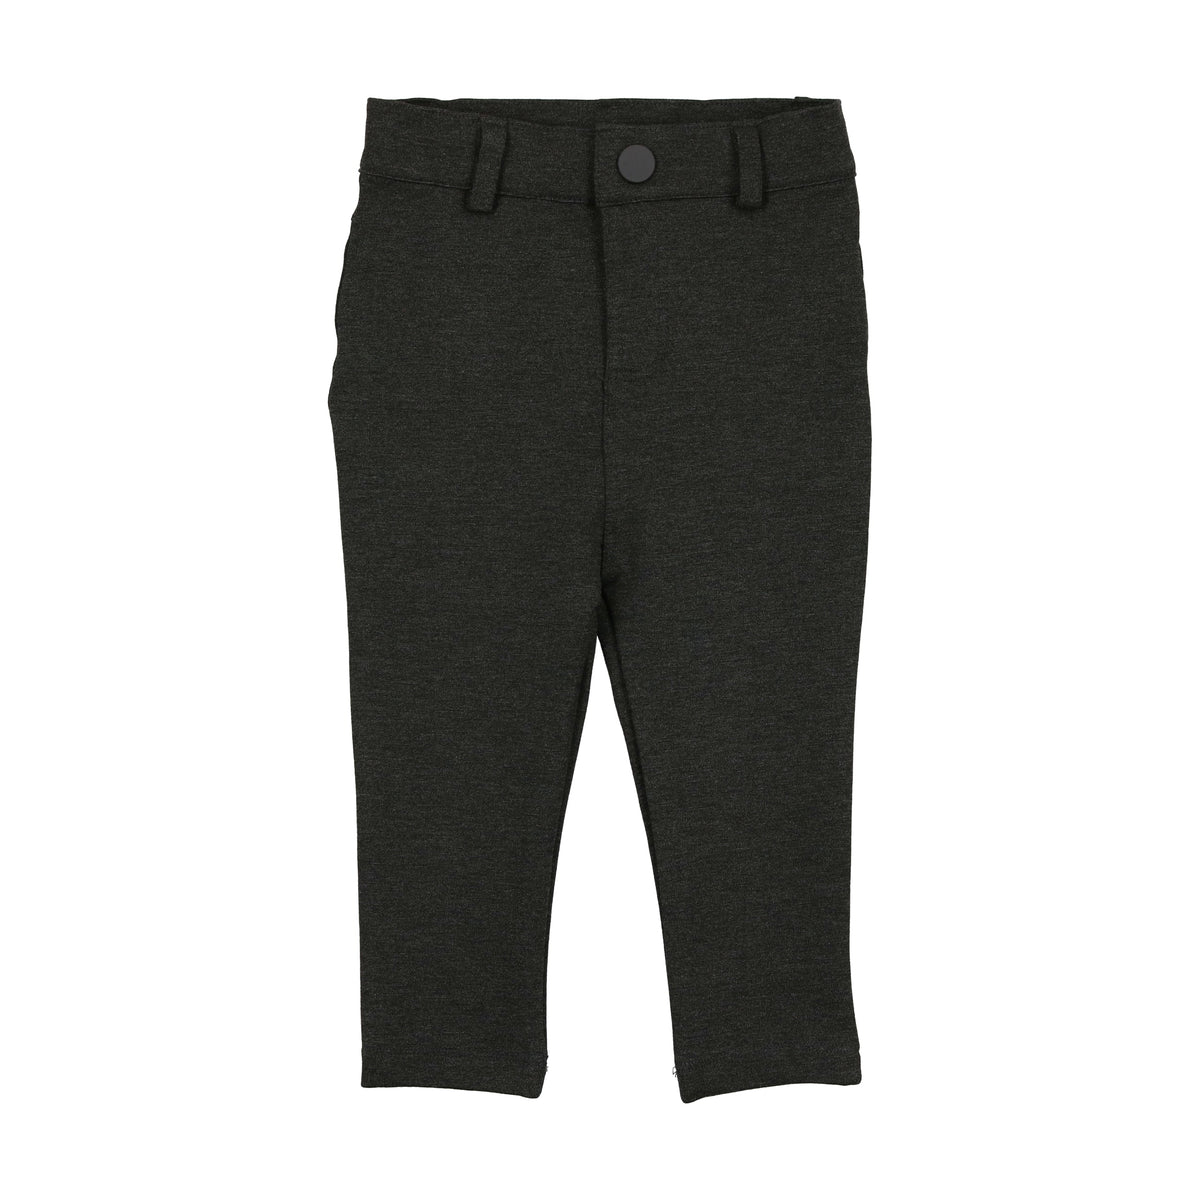 Boys Knit Stretch Pants without Seam – Lil Legs Baby